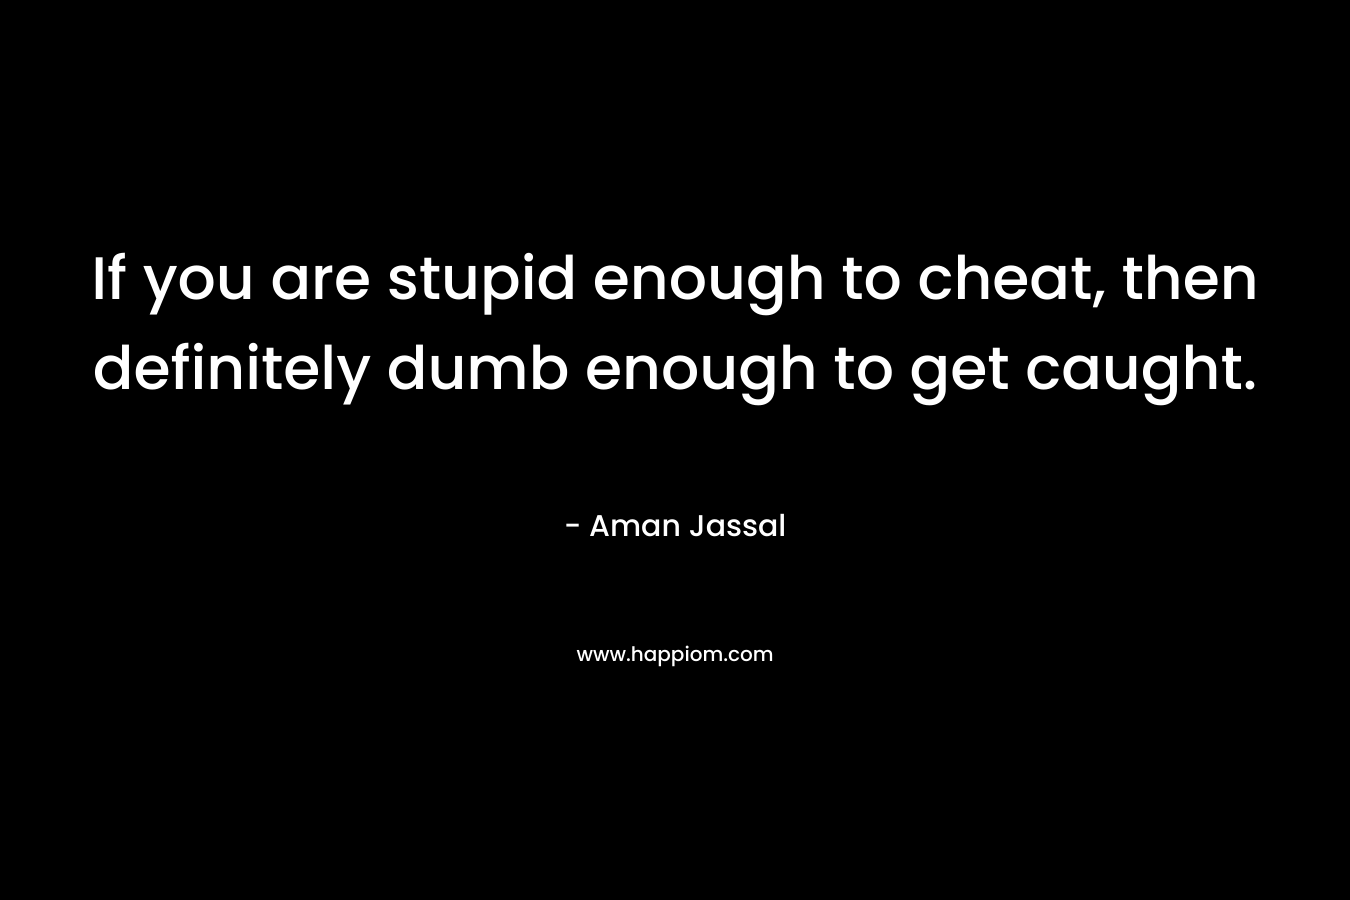 If you are stupid enough to cheat, then definitely dumb enough to get caught.